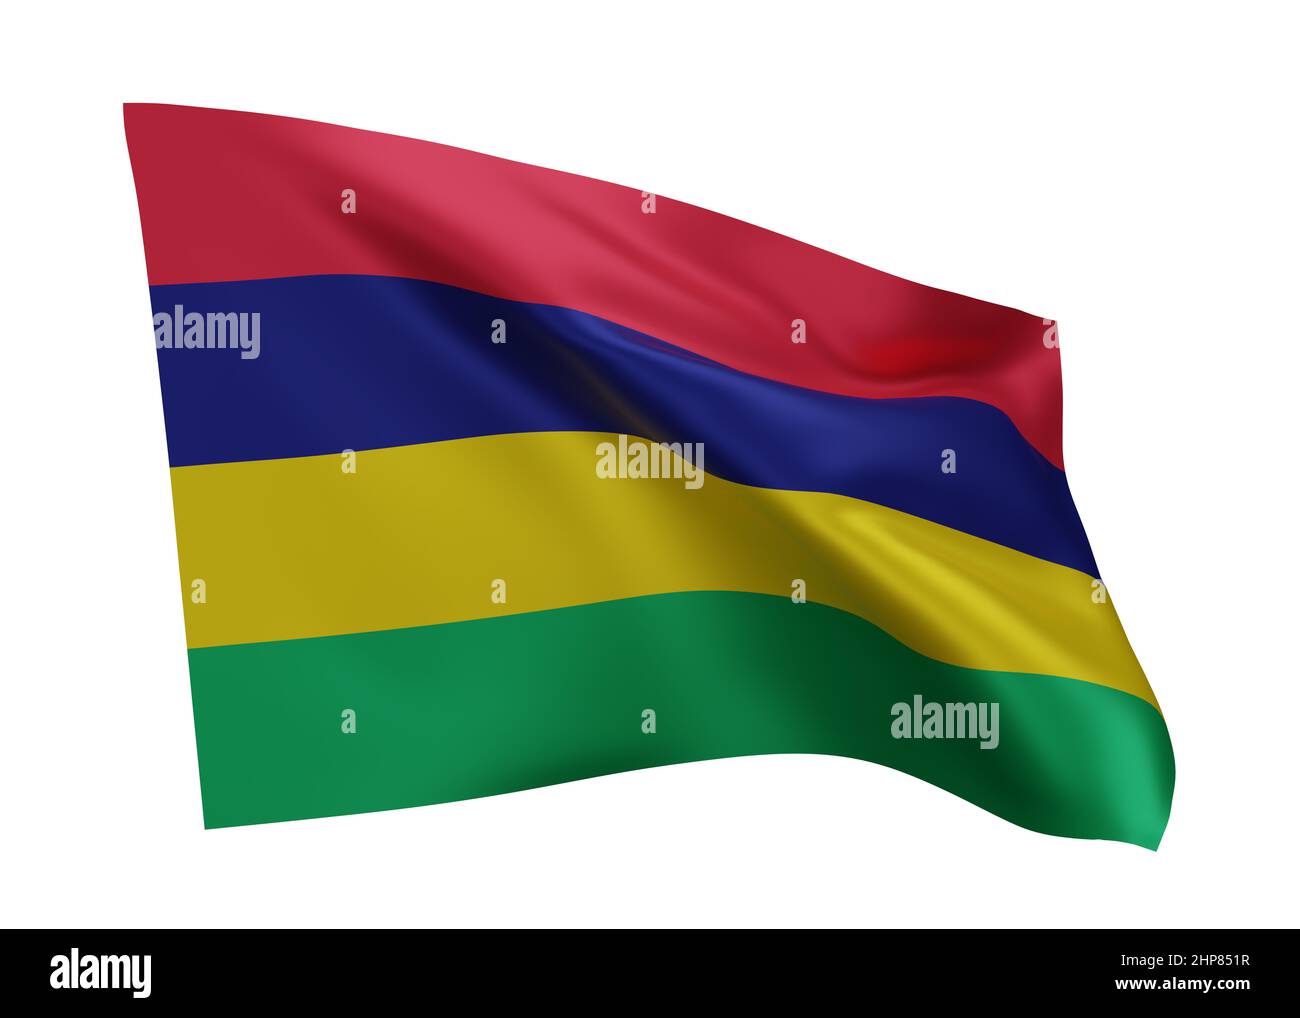 3d illustration flag of Mauritius. Mauritian high resolution flag isolated against white background. 3d rendering Stock Photo